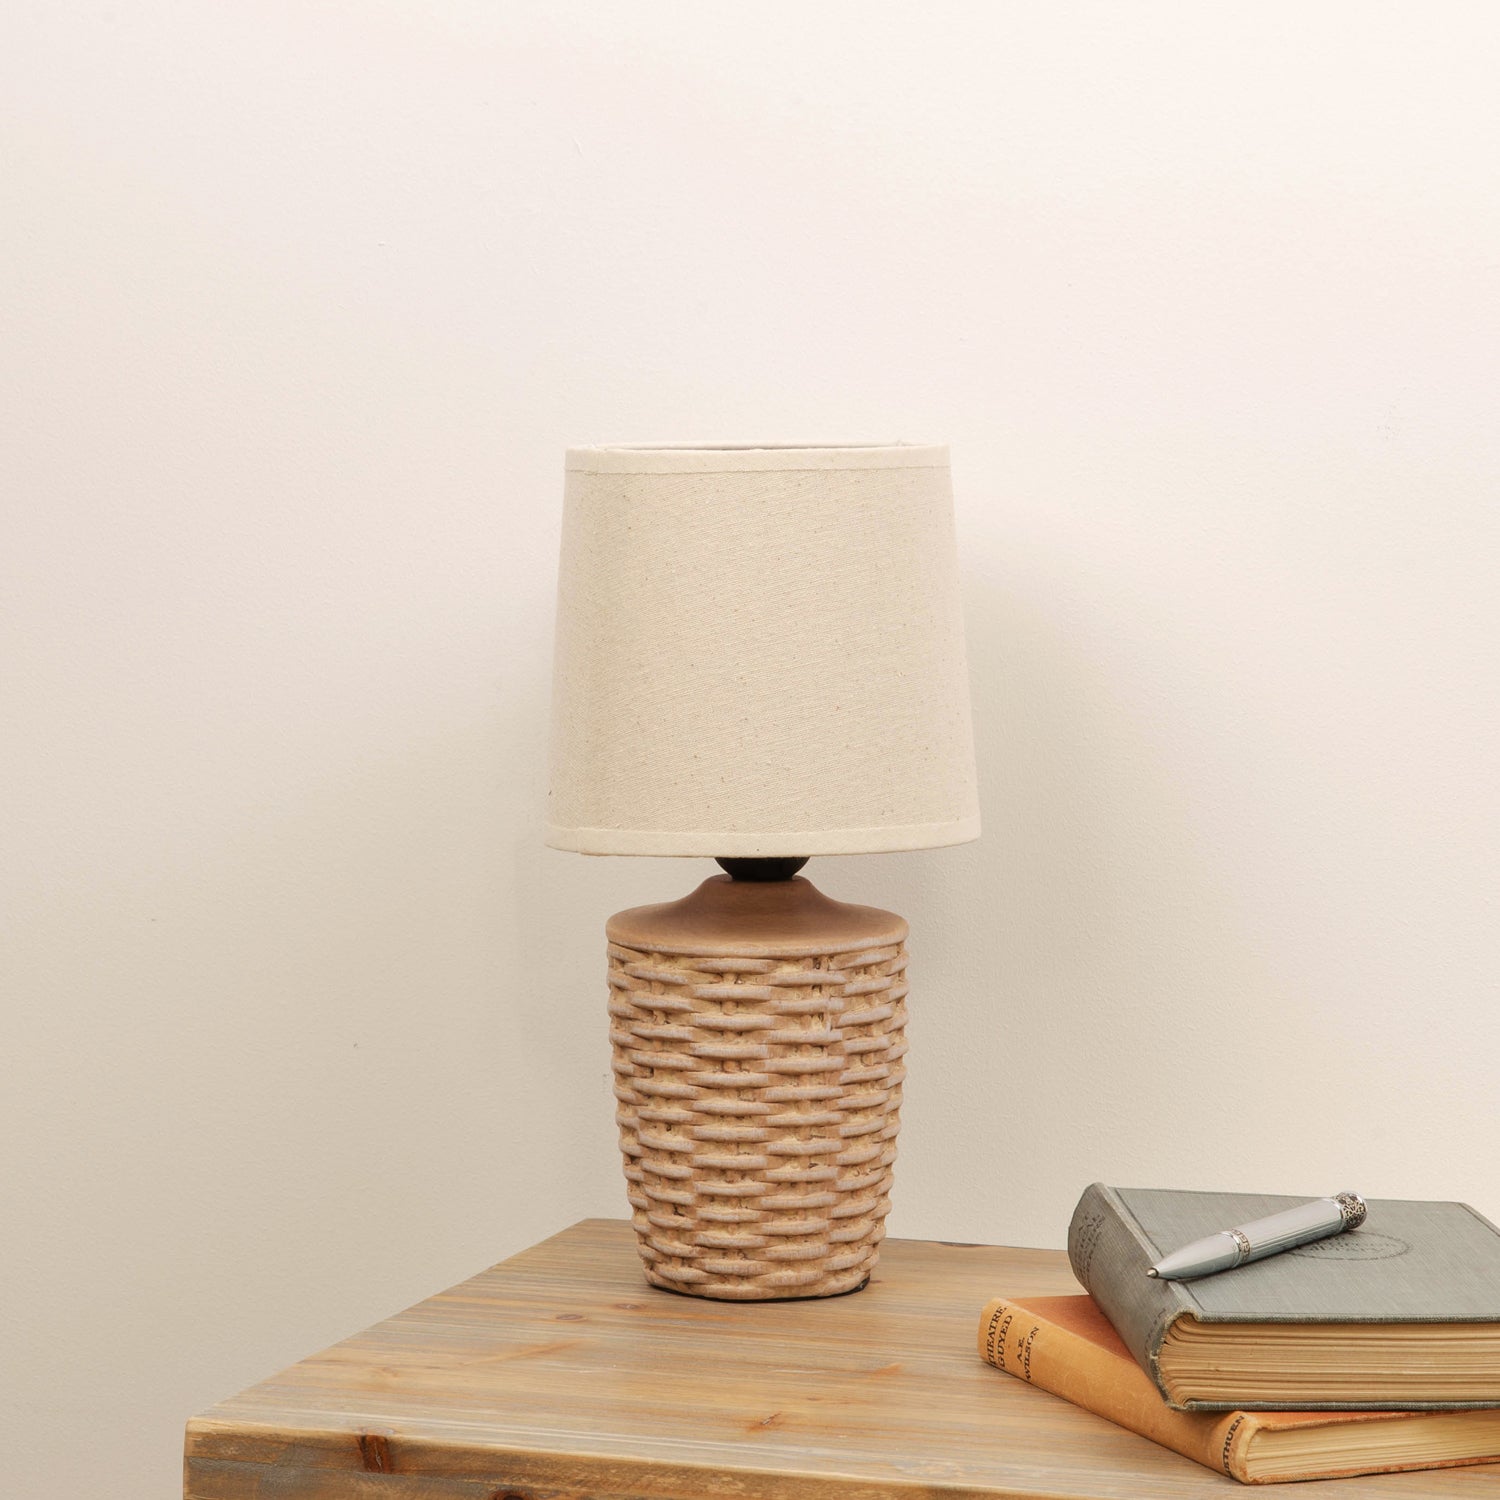 Basket Weave Table Lamp with Beige Linen Shade 30cm